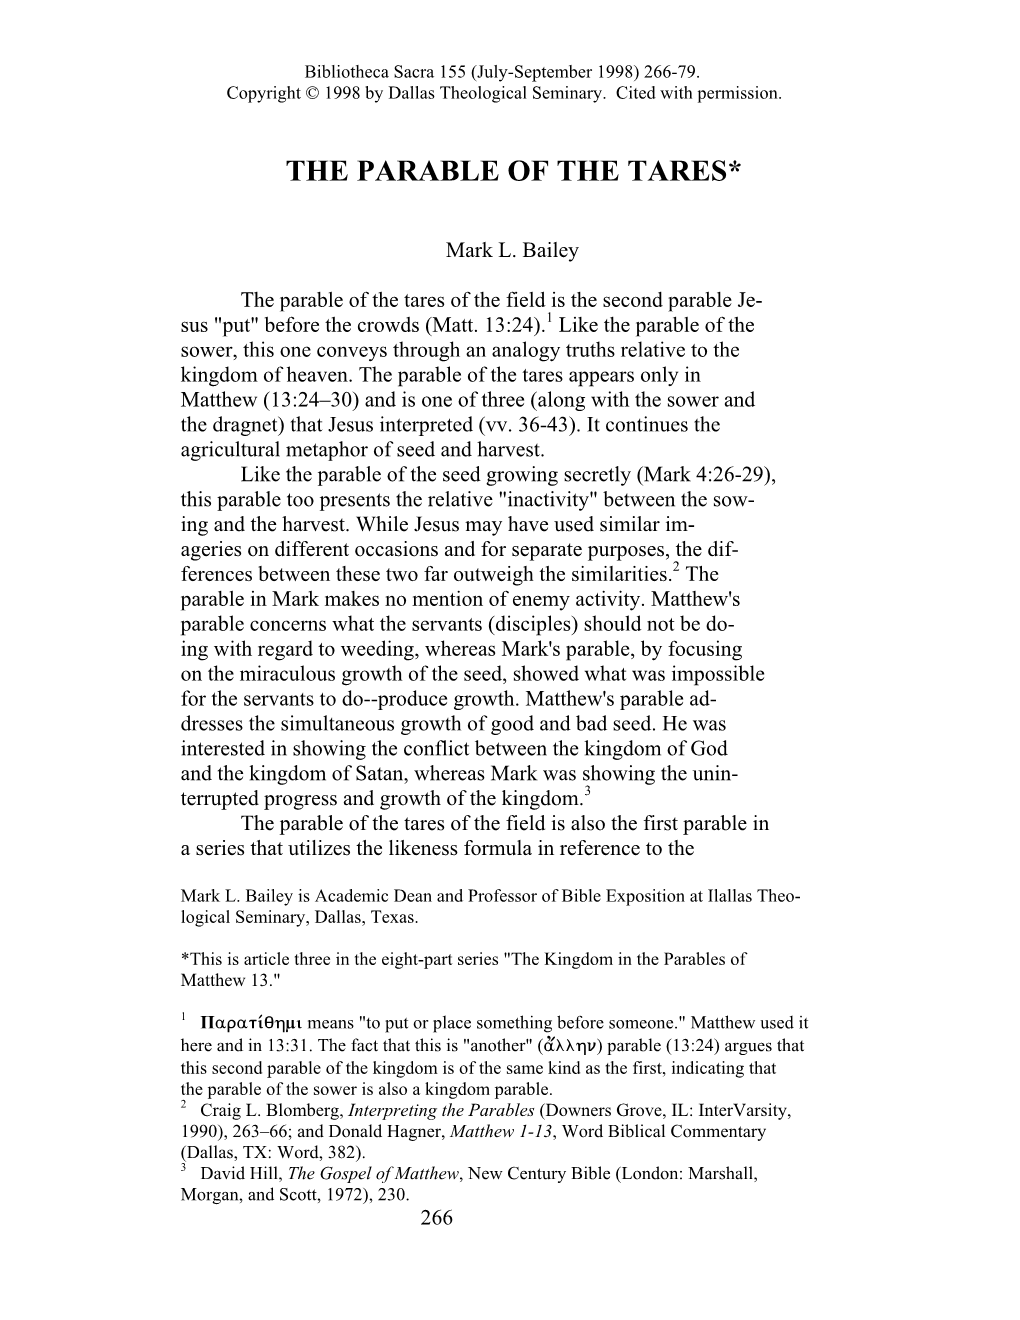 The Parable of the Tares*